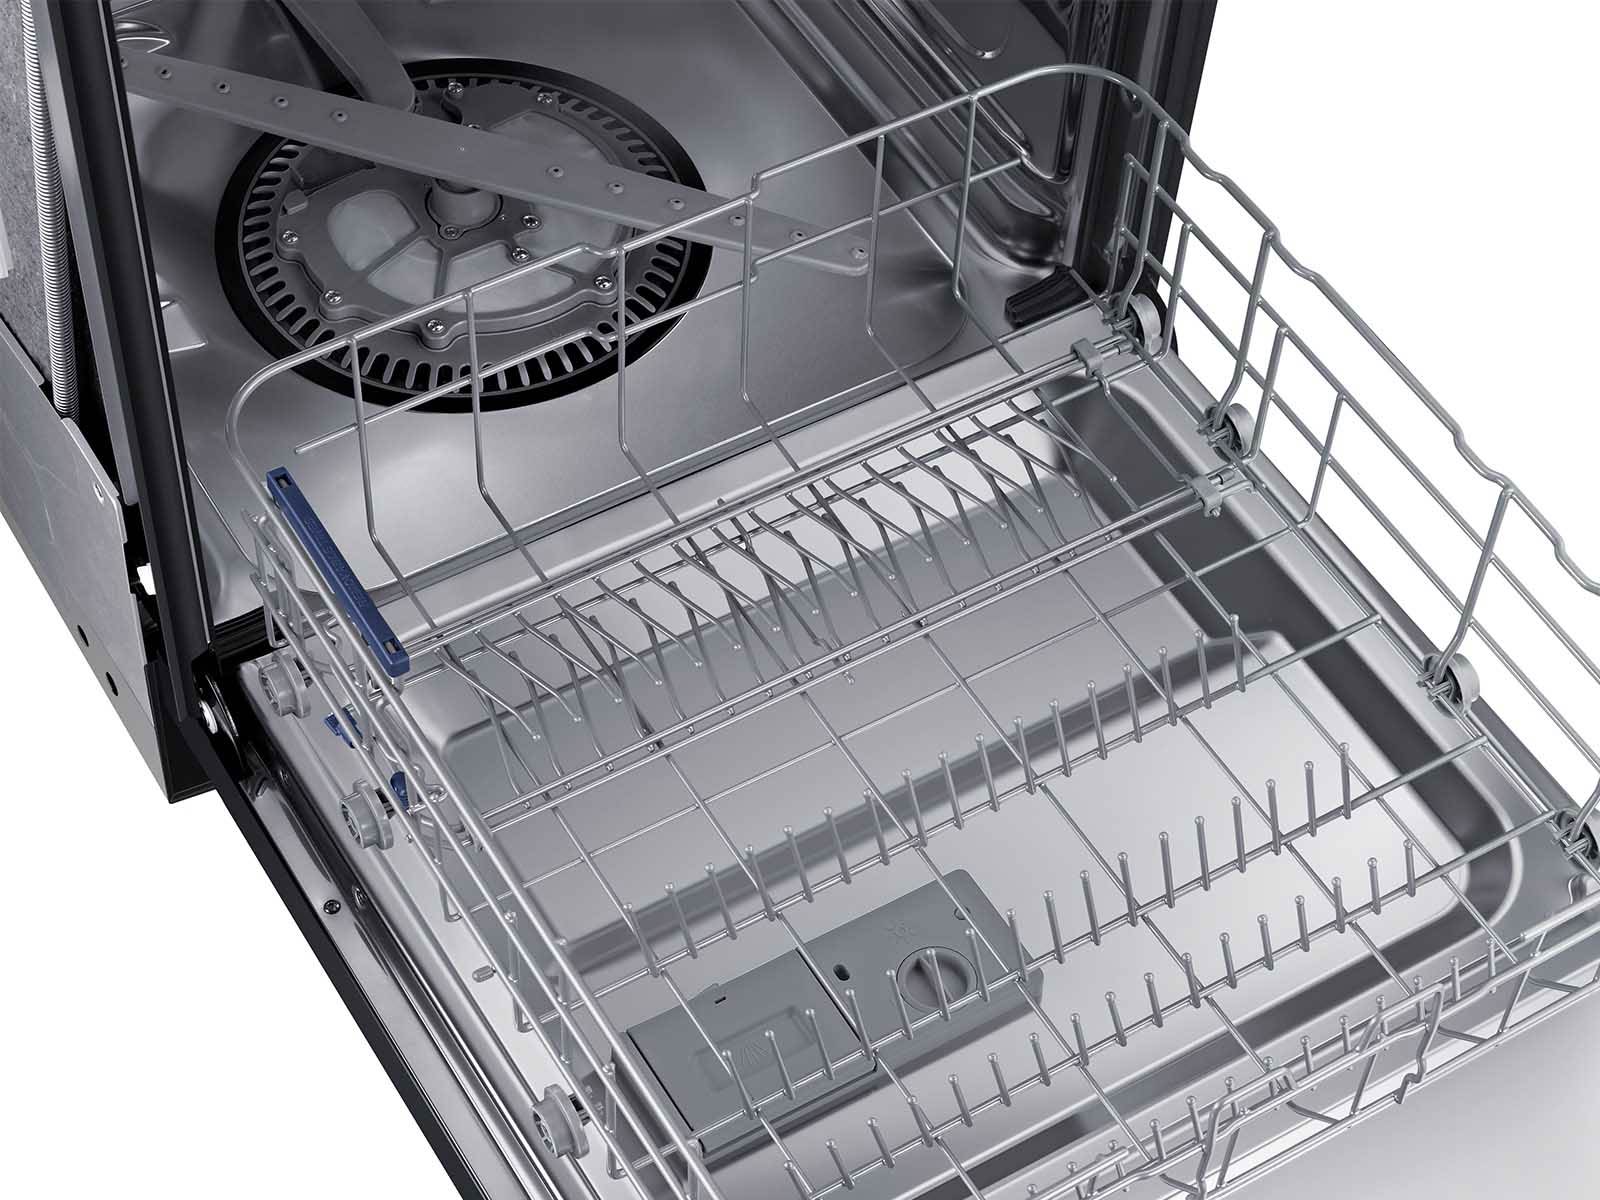 Front Control Dishwasher with Stainless Steel Interior Dishwashers ...